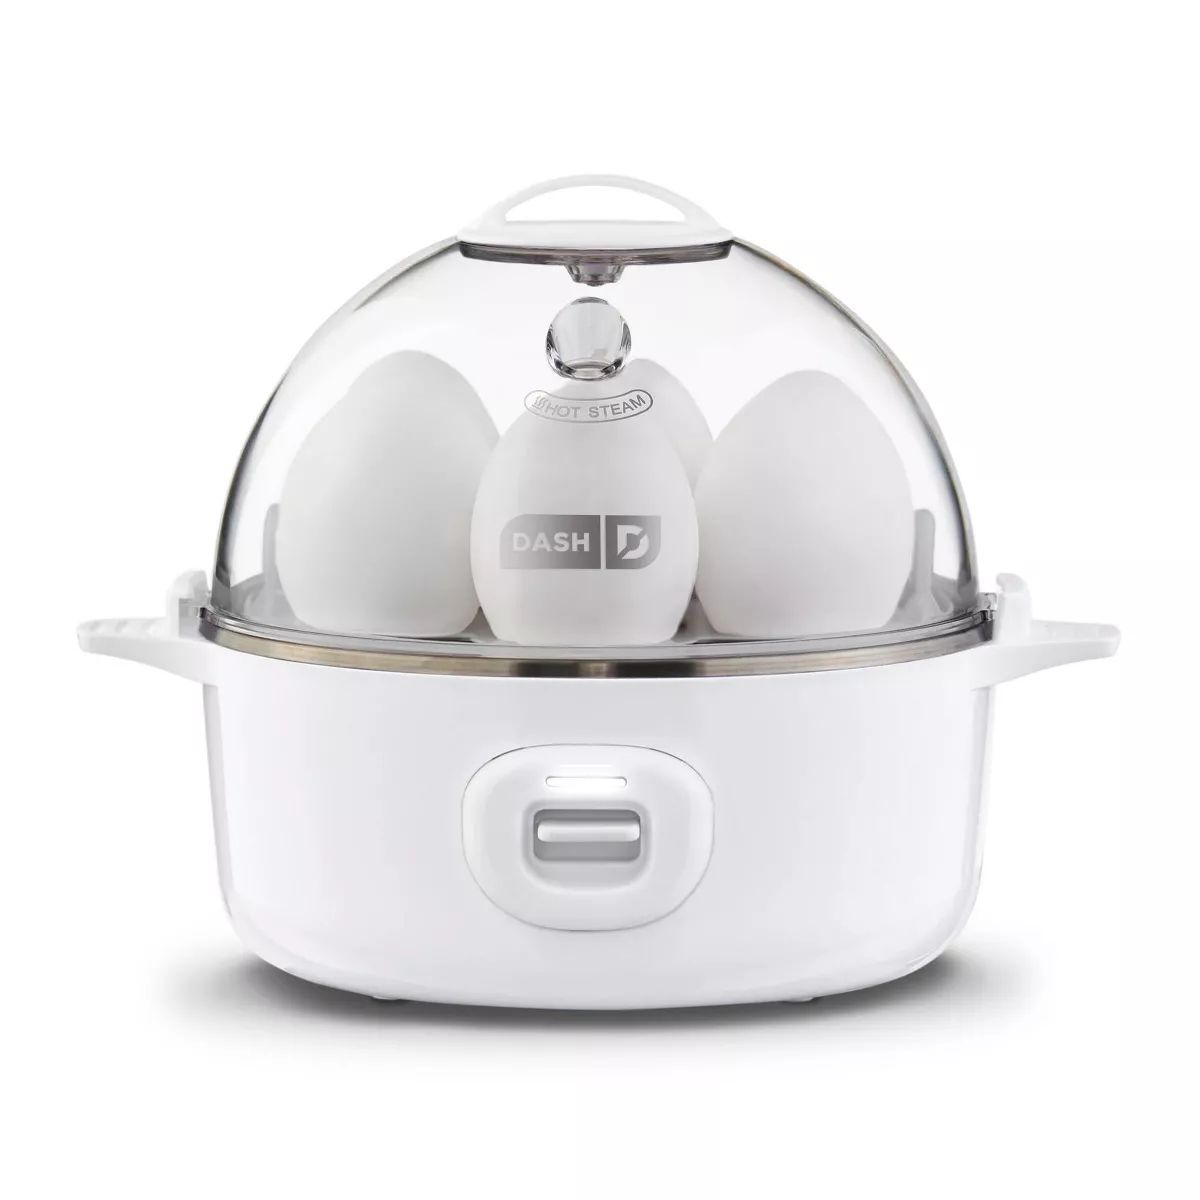 Dash 3-in-1 Express 7-Egg Cooker with Omelet Maker and Poaching | Target